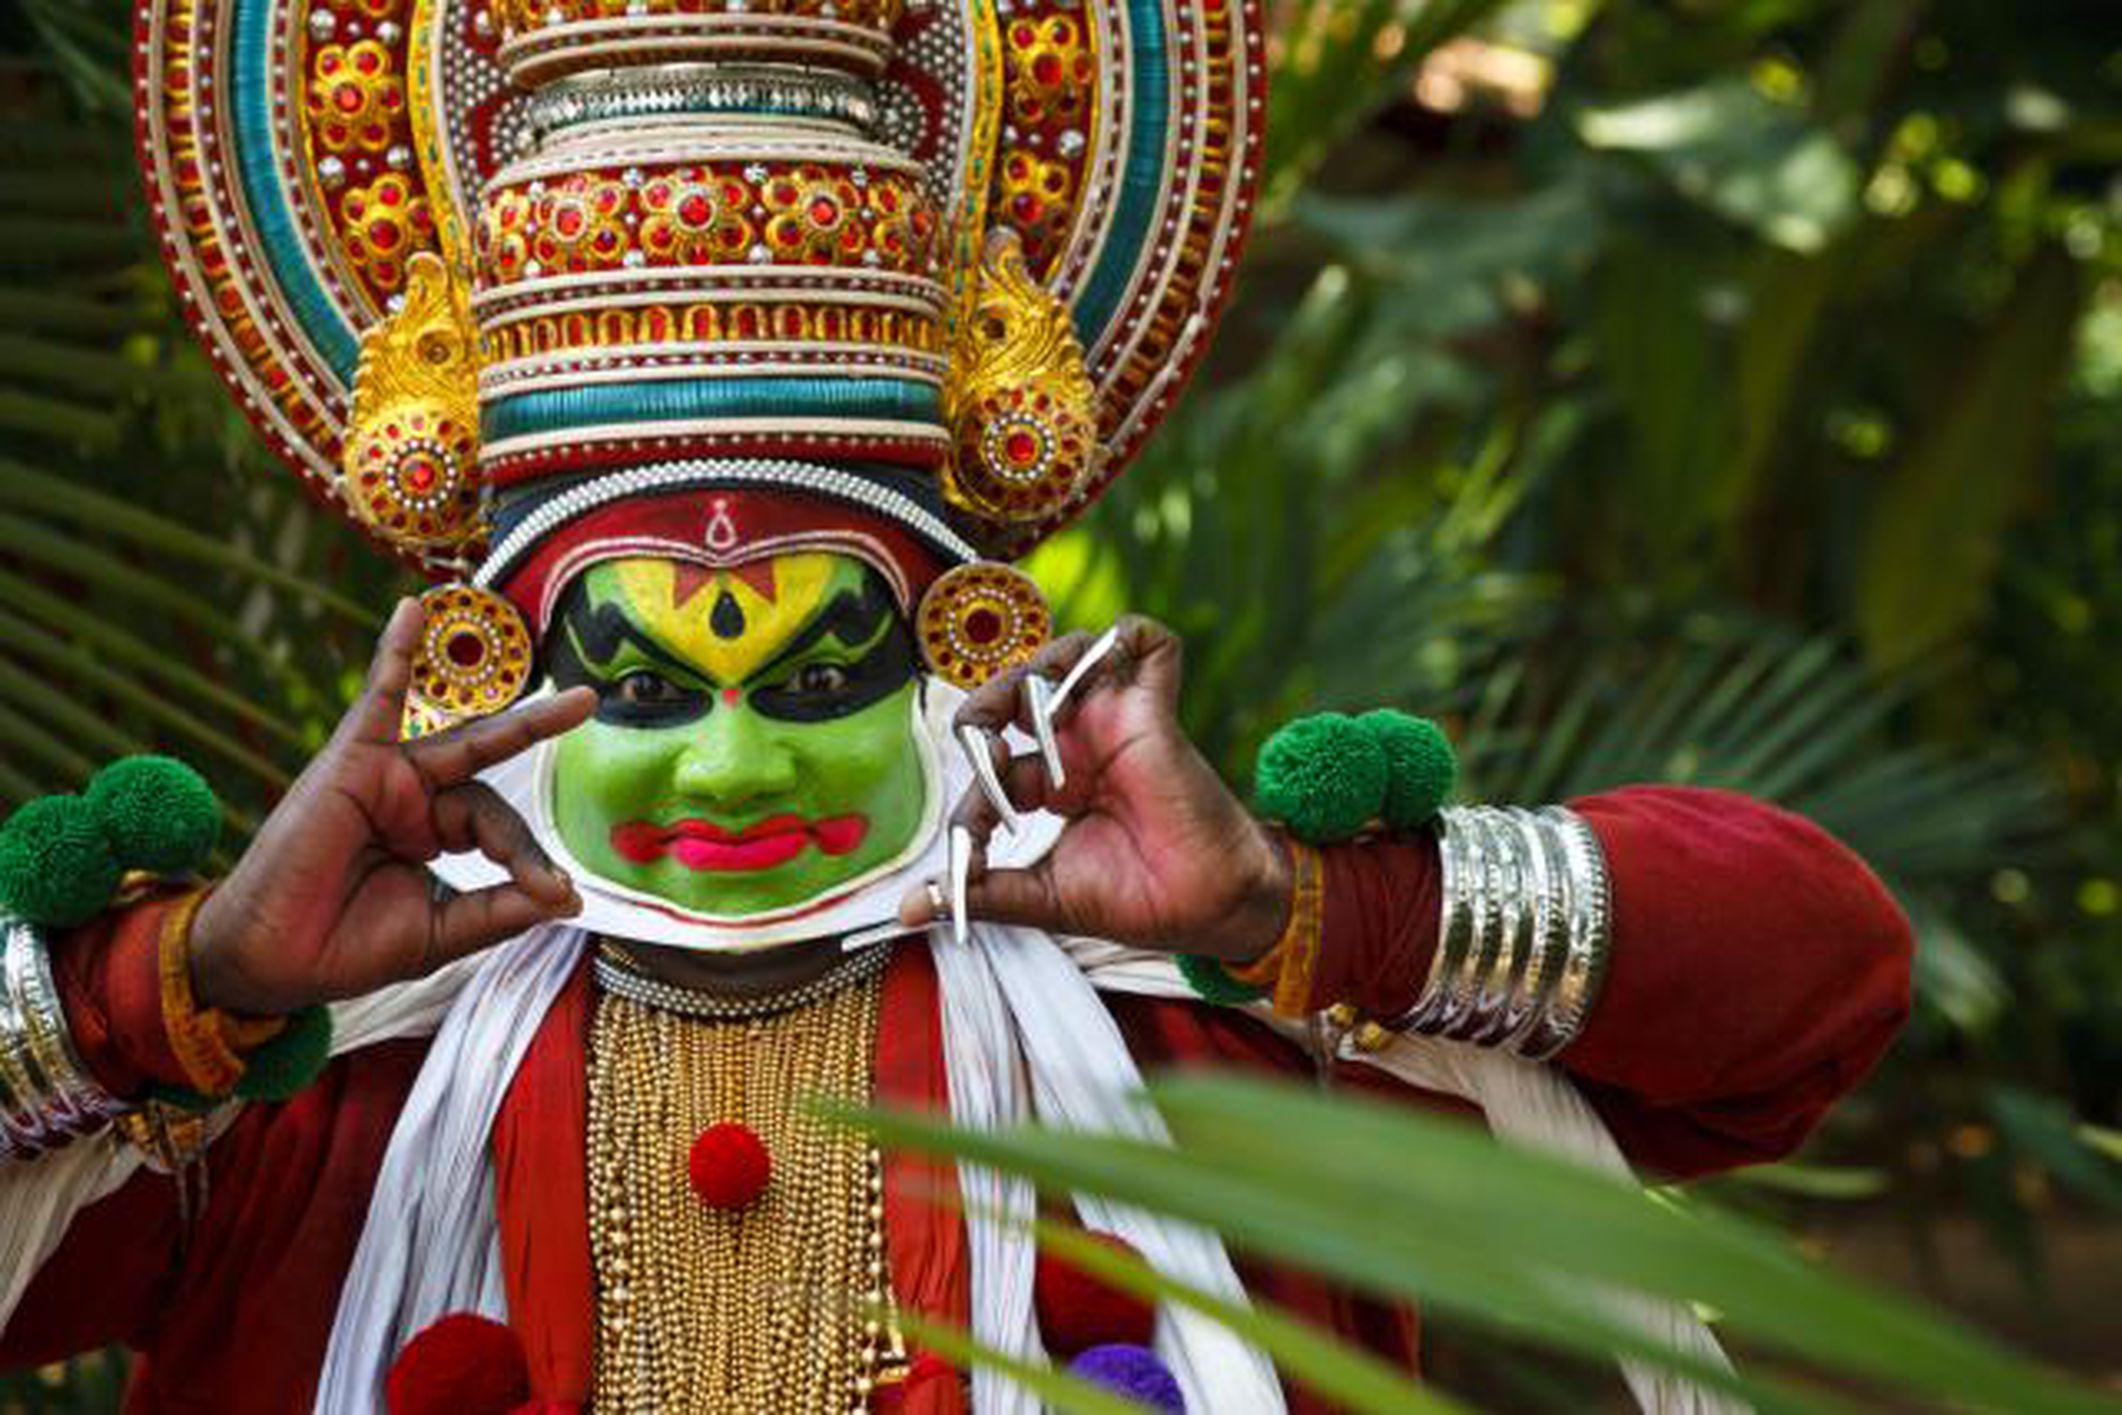 Kathakali Performer class Lazyload data Click Tracked.